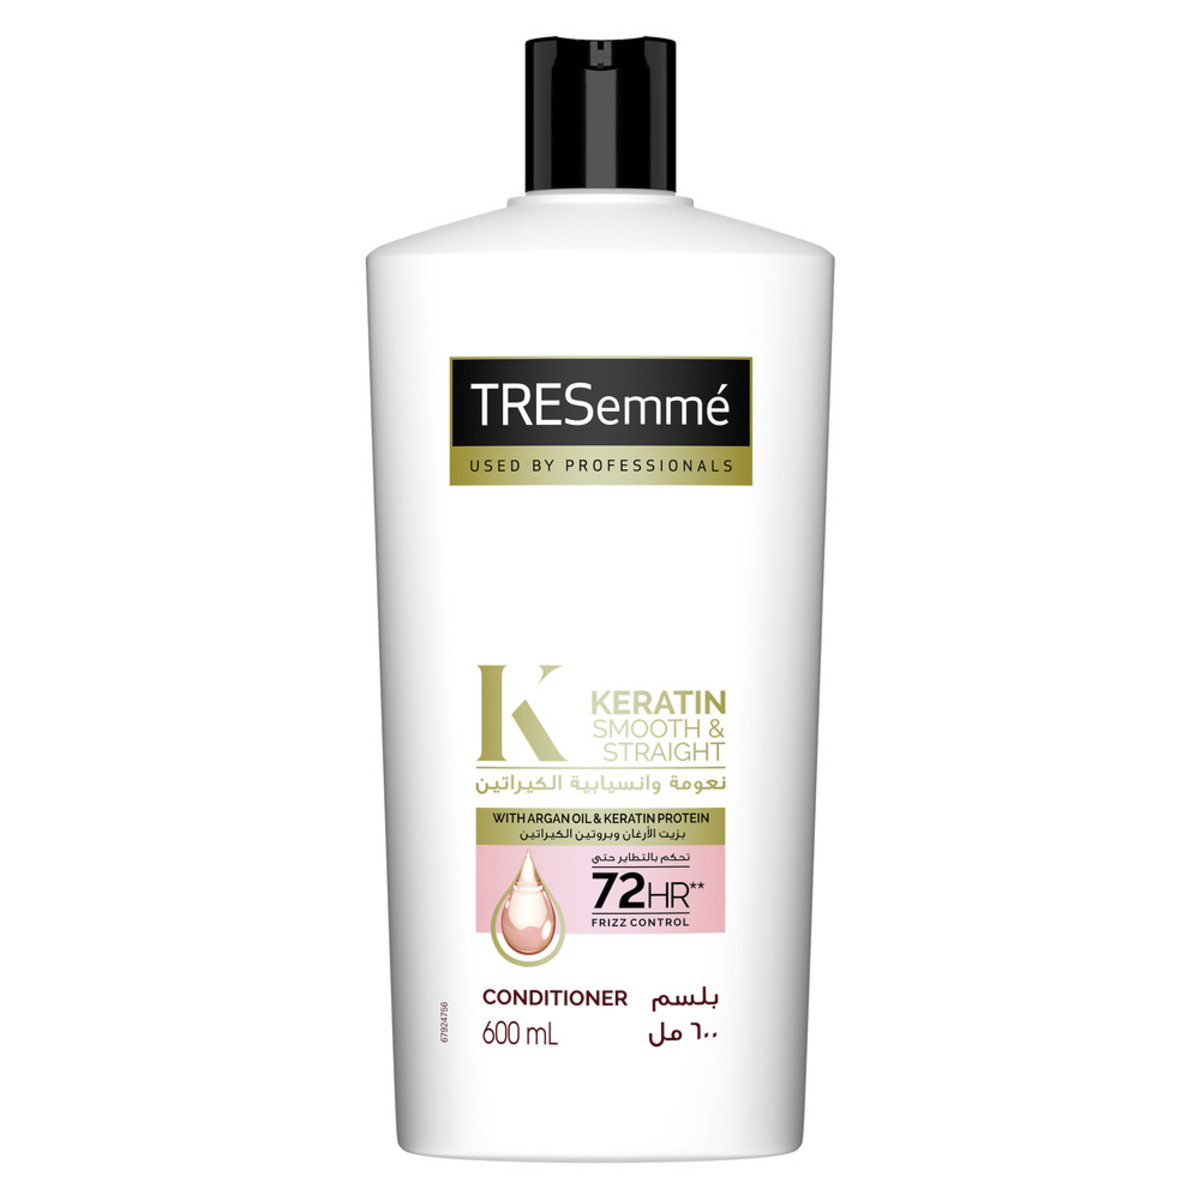 TRESemme Keratin Smooth Conditioner with Argan Oil for Dry & Frizzy Hair 600 ml